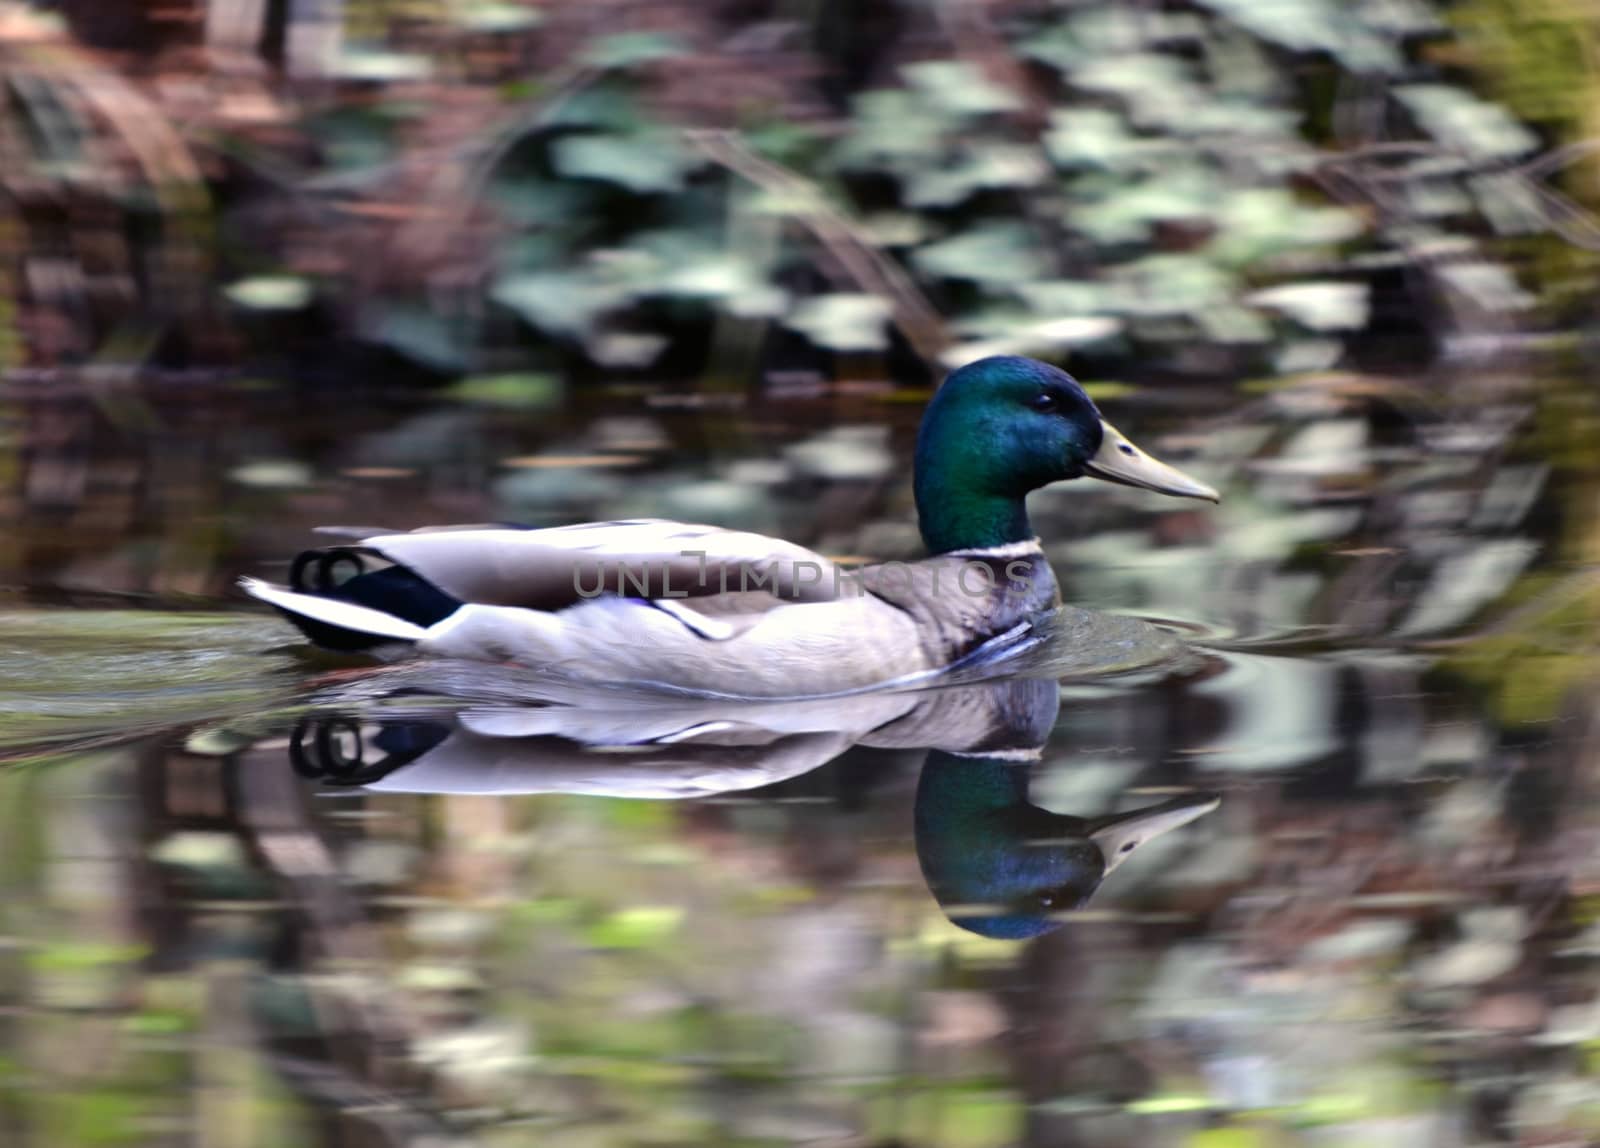 Male wild duck against a natural blurred background